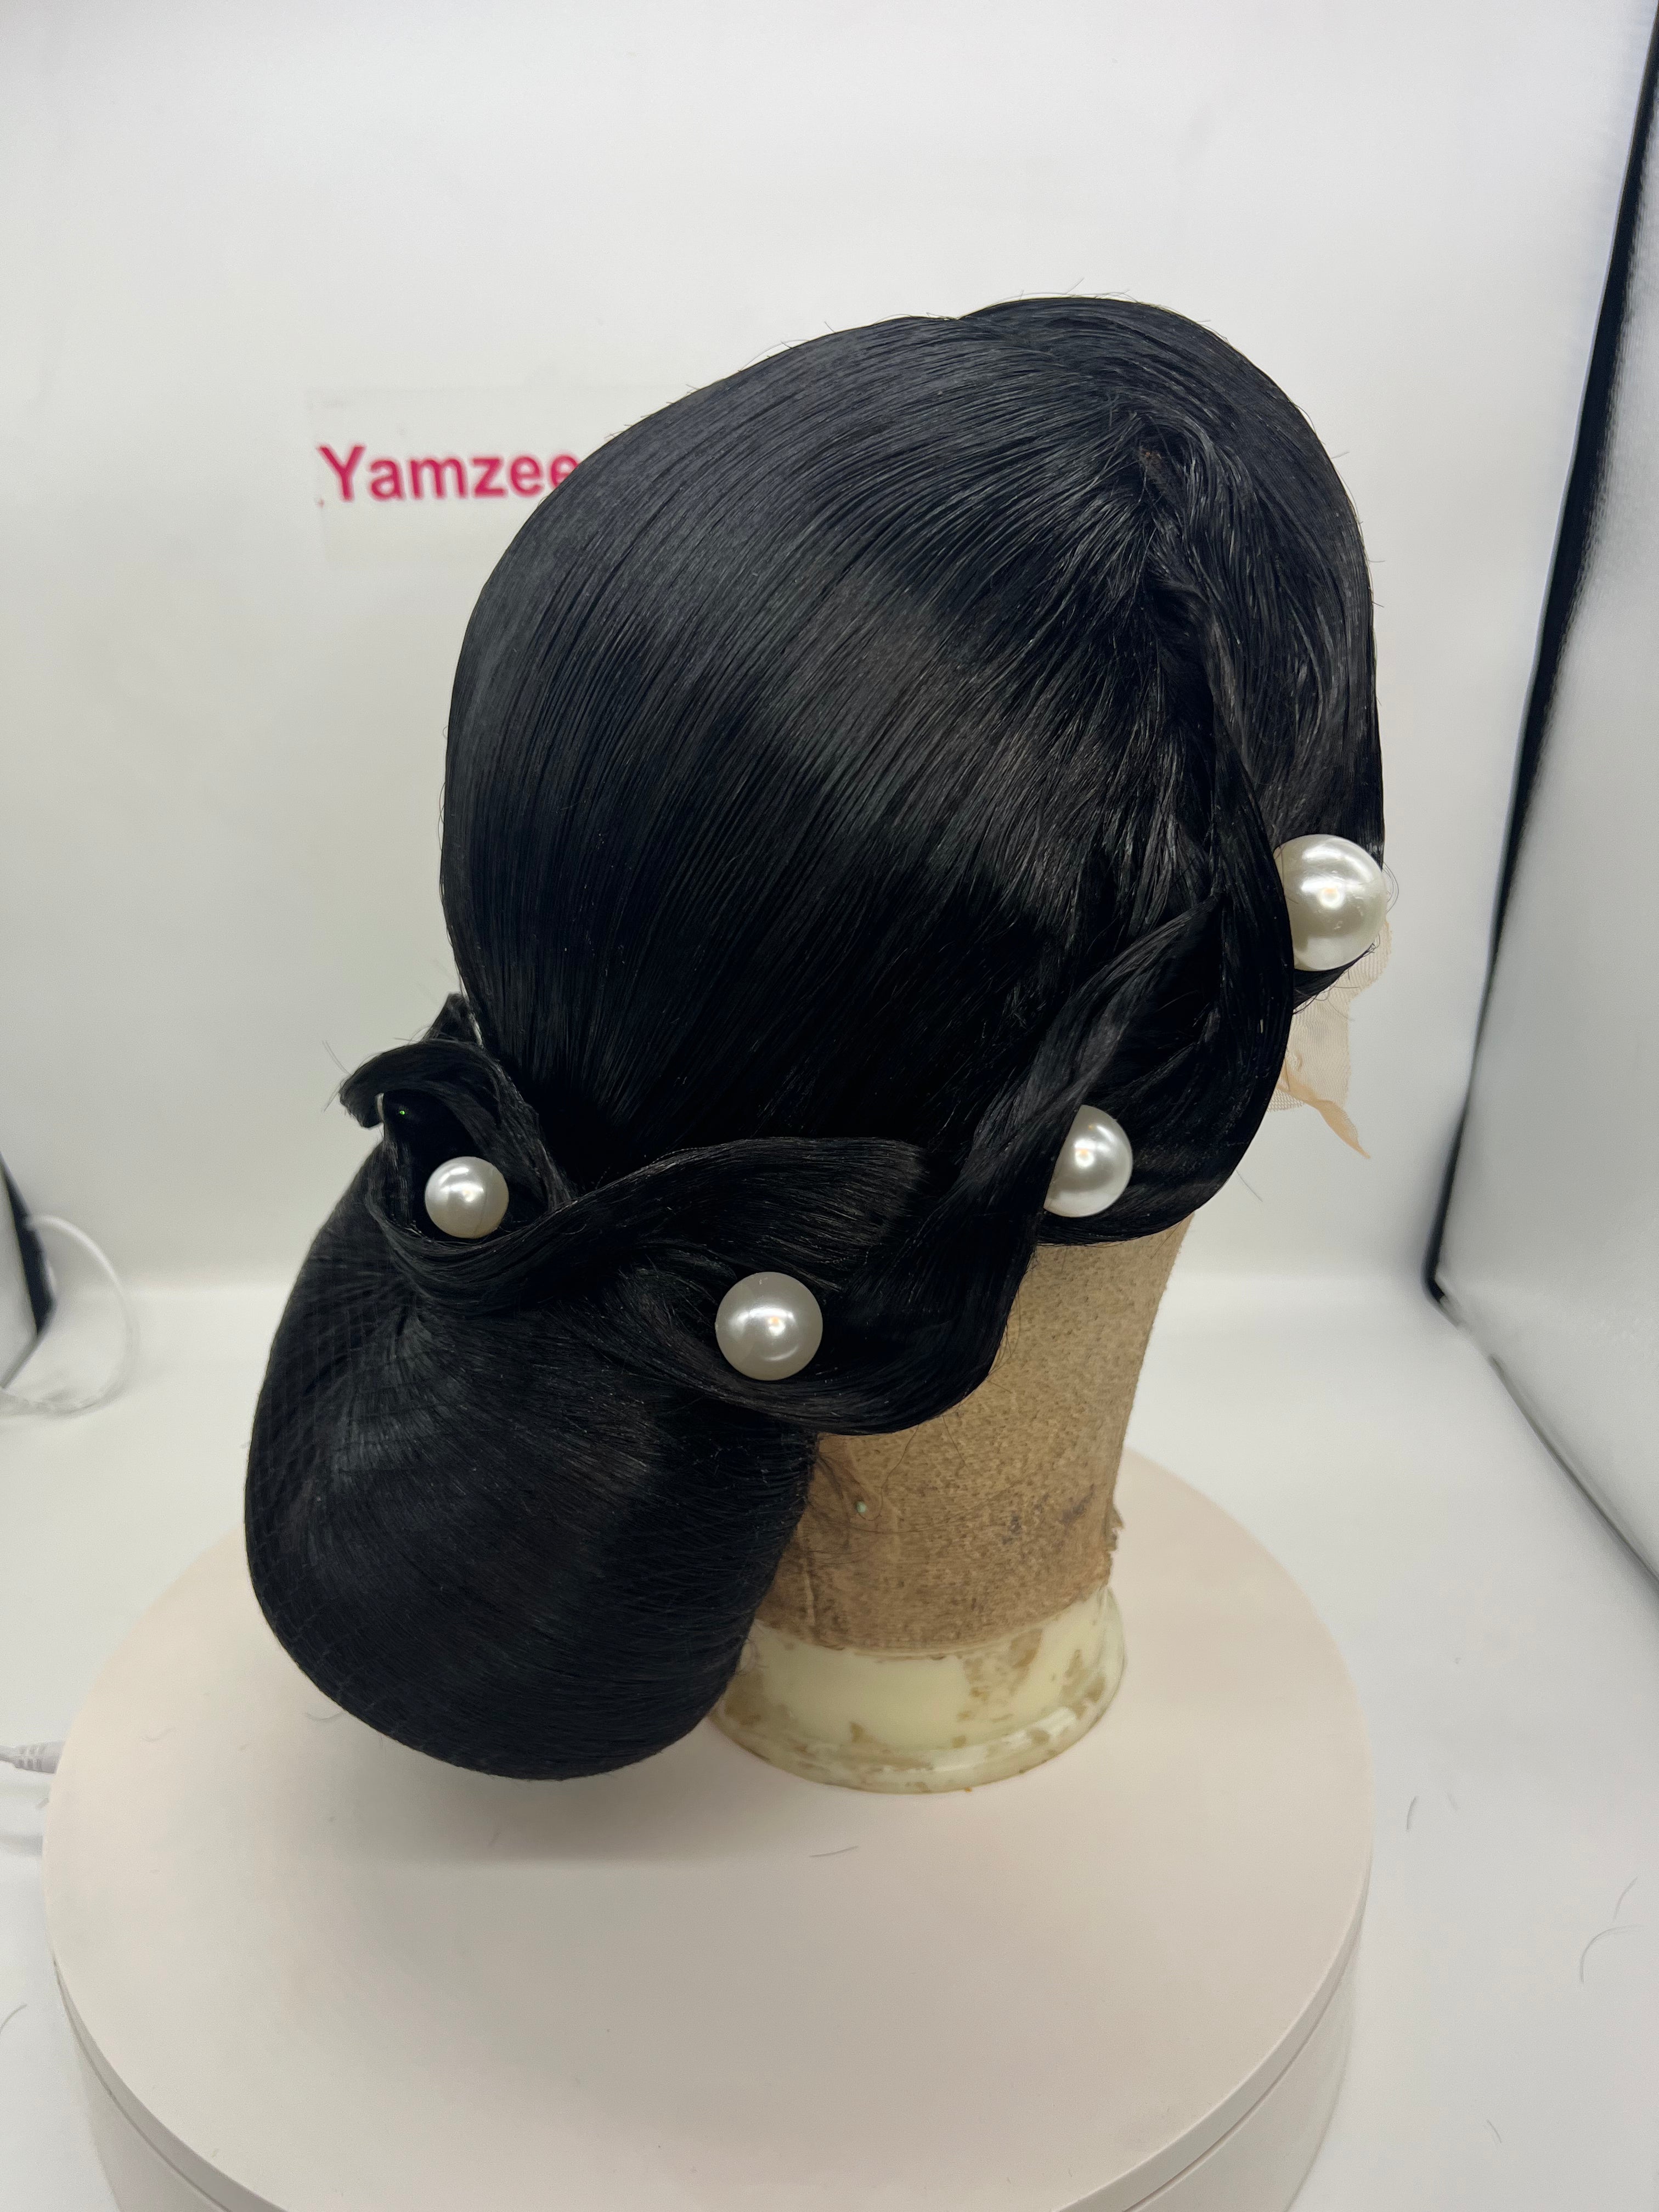 All In One Wig Kit – Yamzee beauty touch